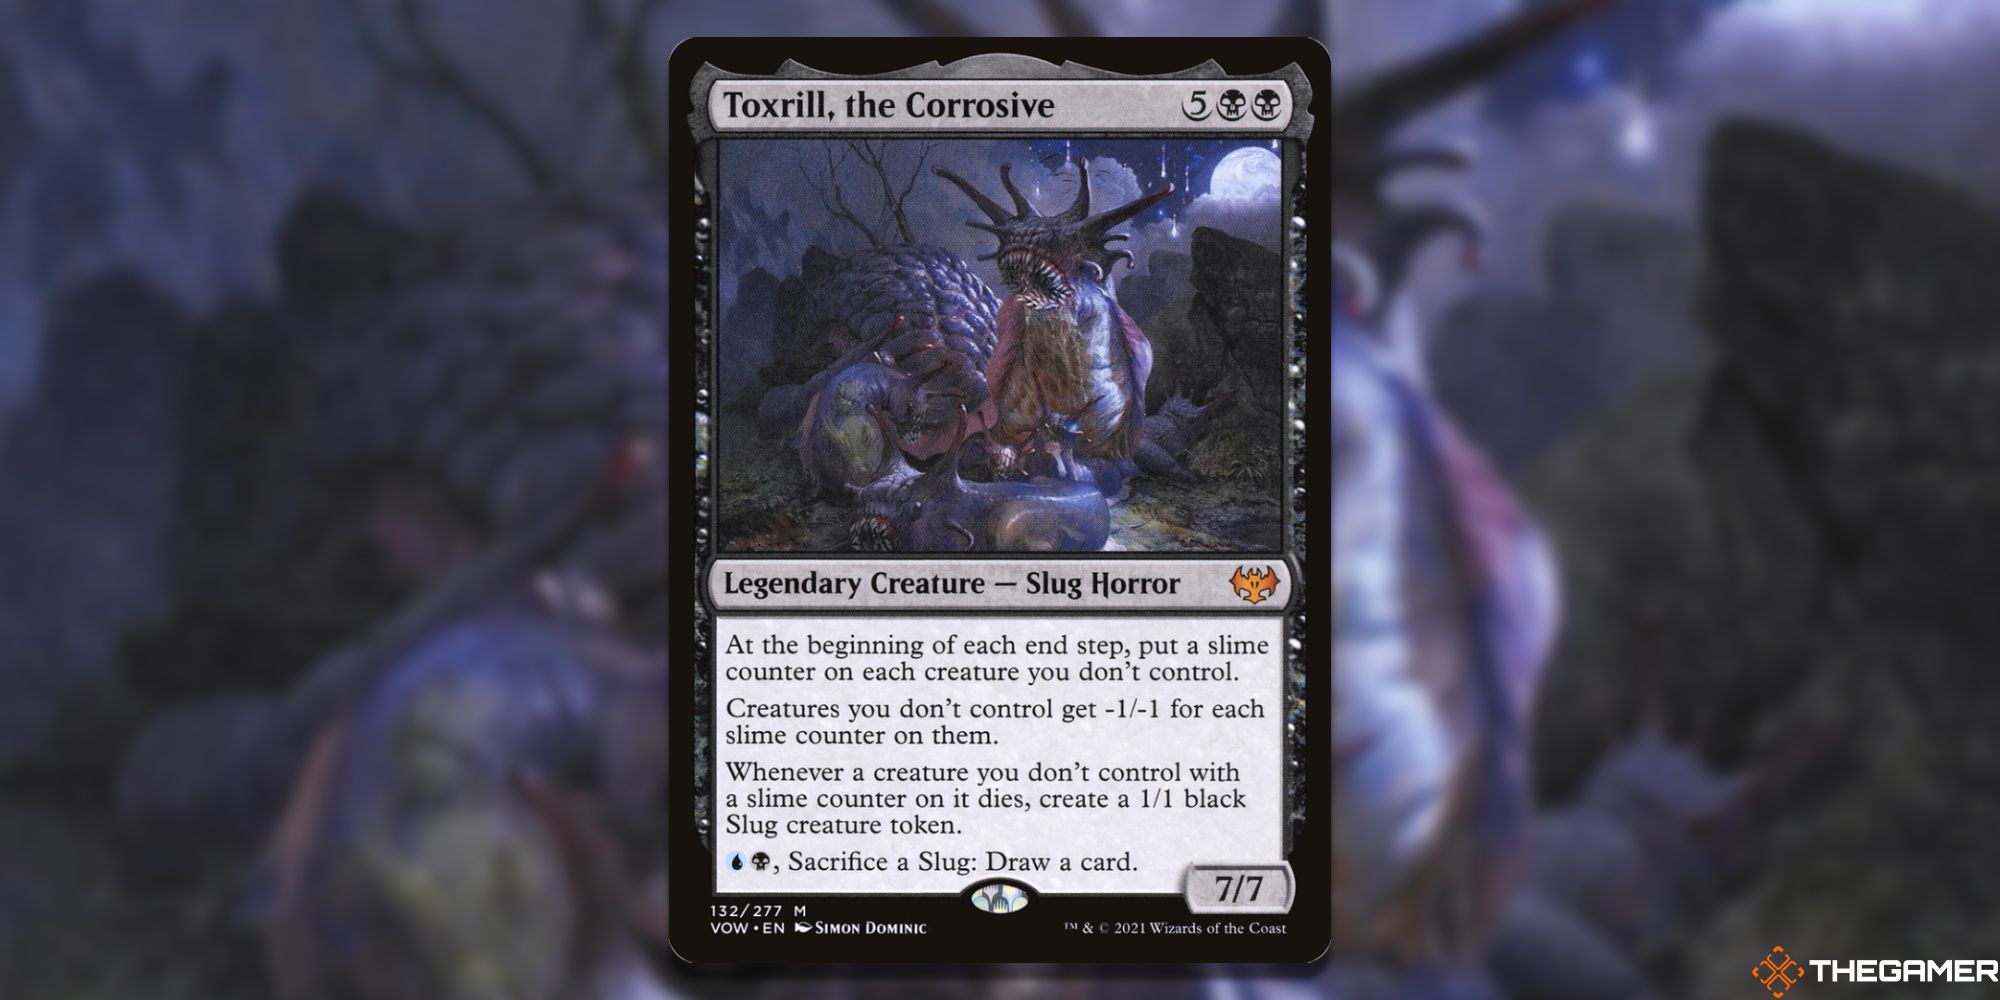 Image of the Toxrill, the Corrosive card in Magic: The Gathering, with art by Simon Dominic